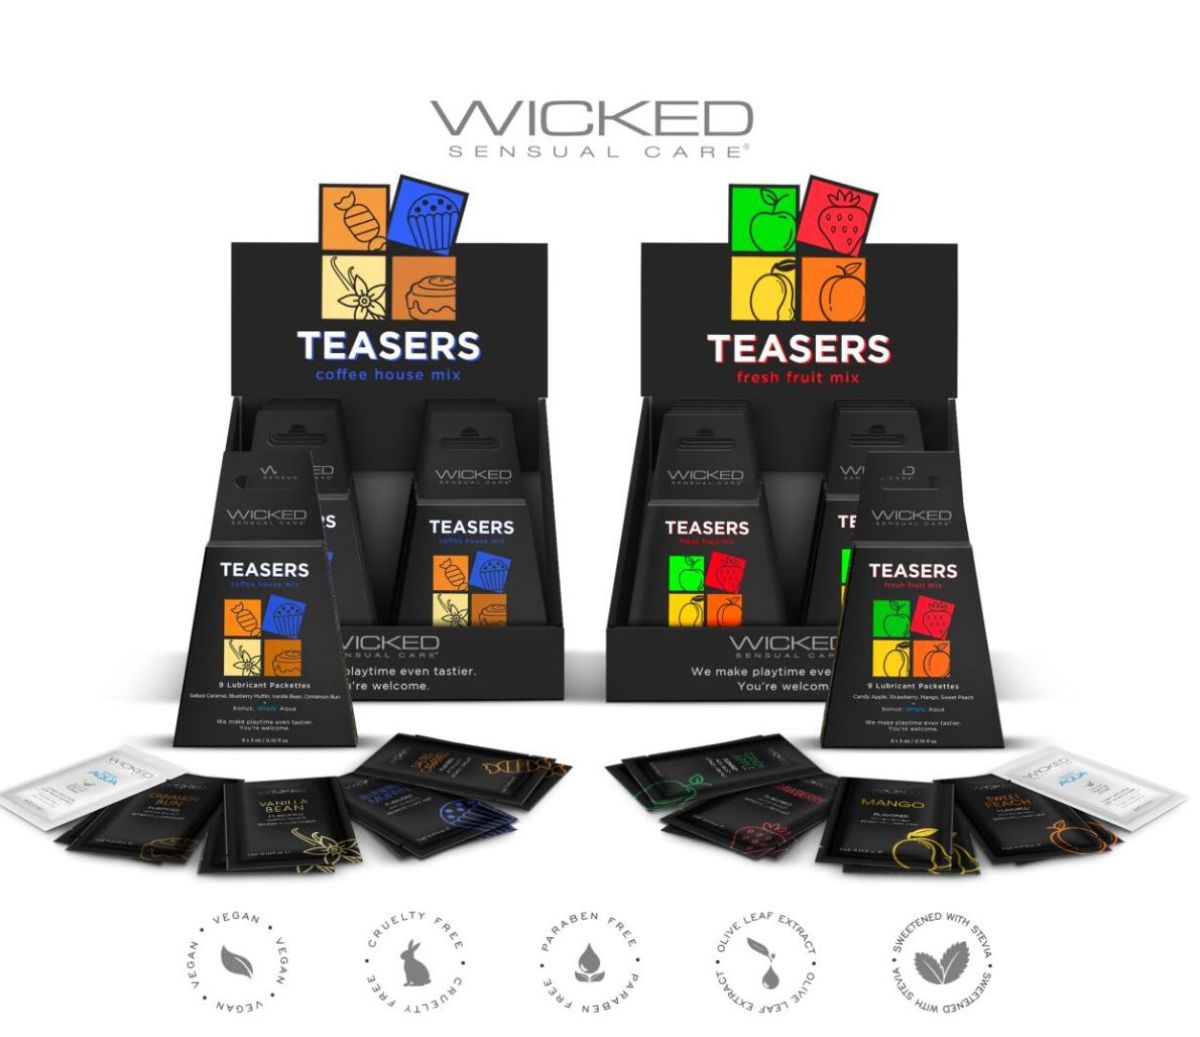 Enhanced Graphics & Revamped Packaging Distinguish WICKED SENSUAL CARE’s Newest Teasers Collections